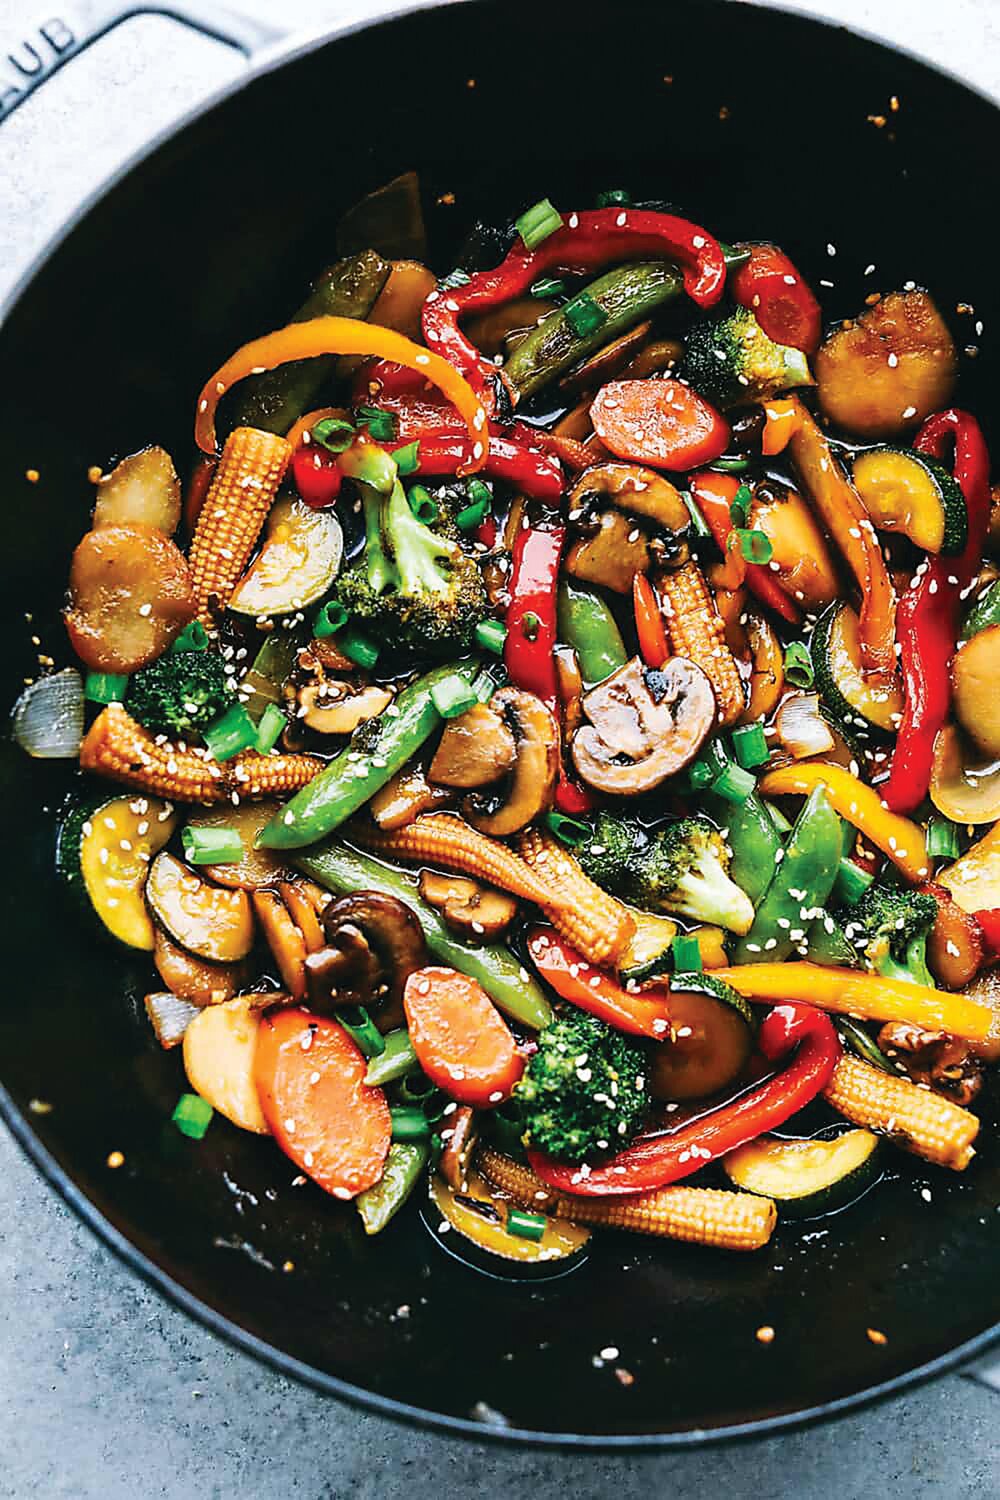 A basic stir-fry recipe can be easily adapted to feature vegetables you have on hand, with meat, poultry or tofu added for protein.